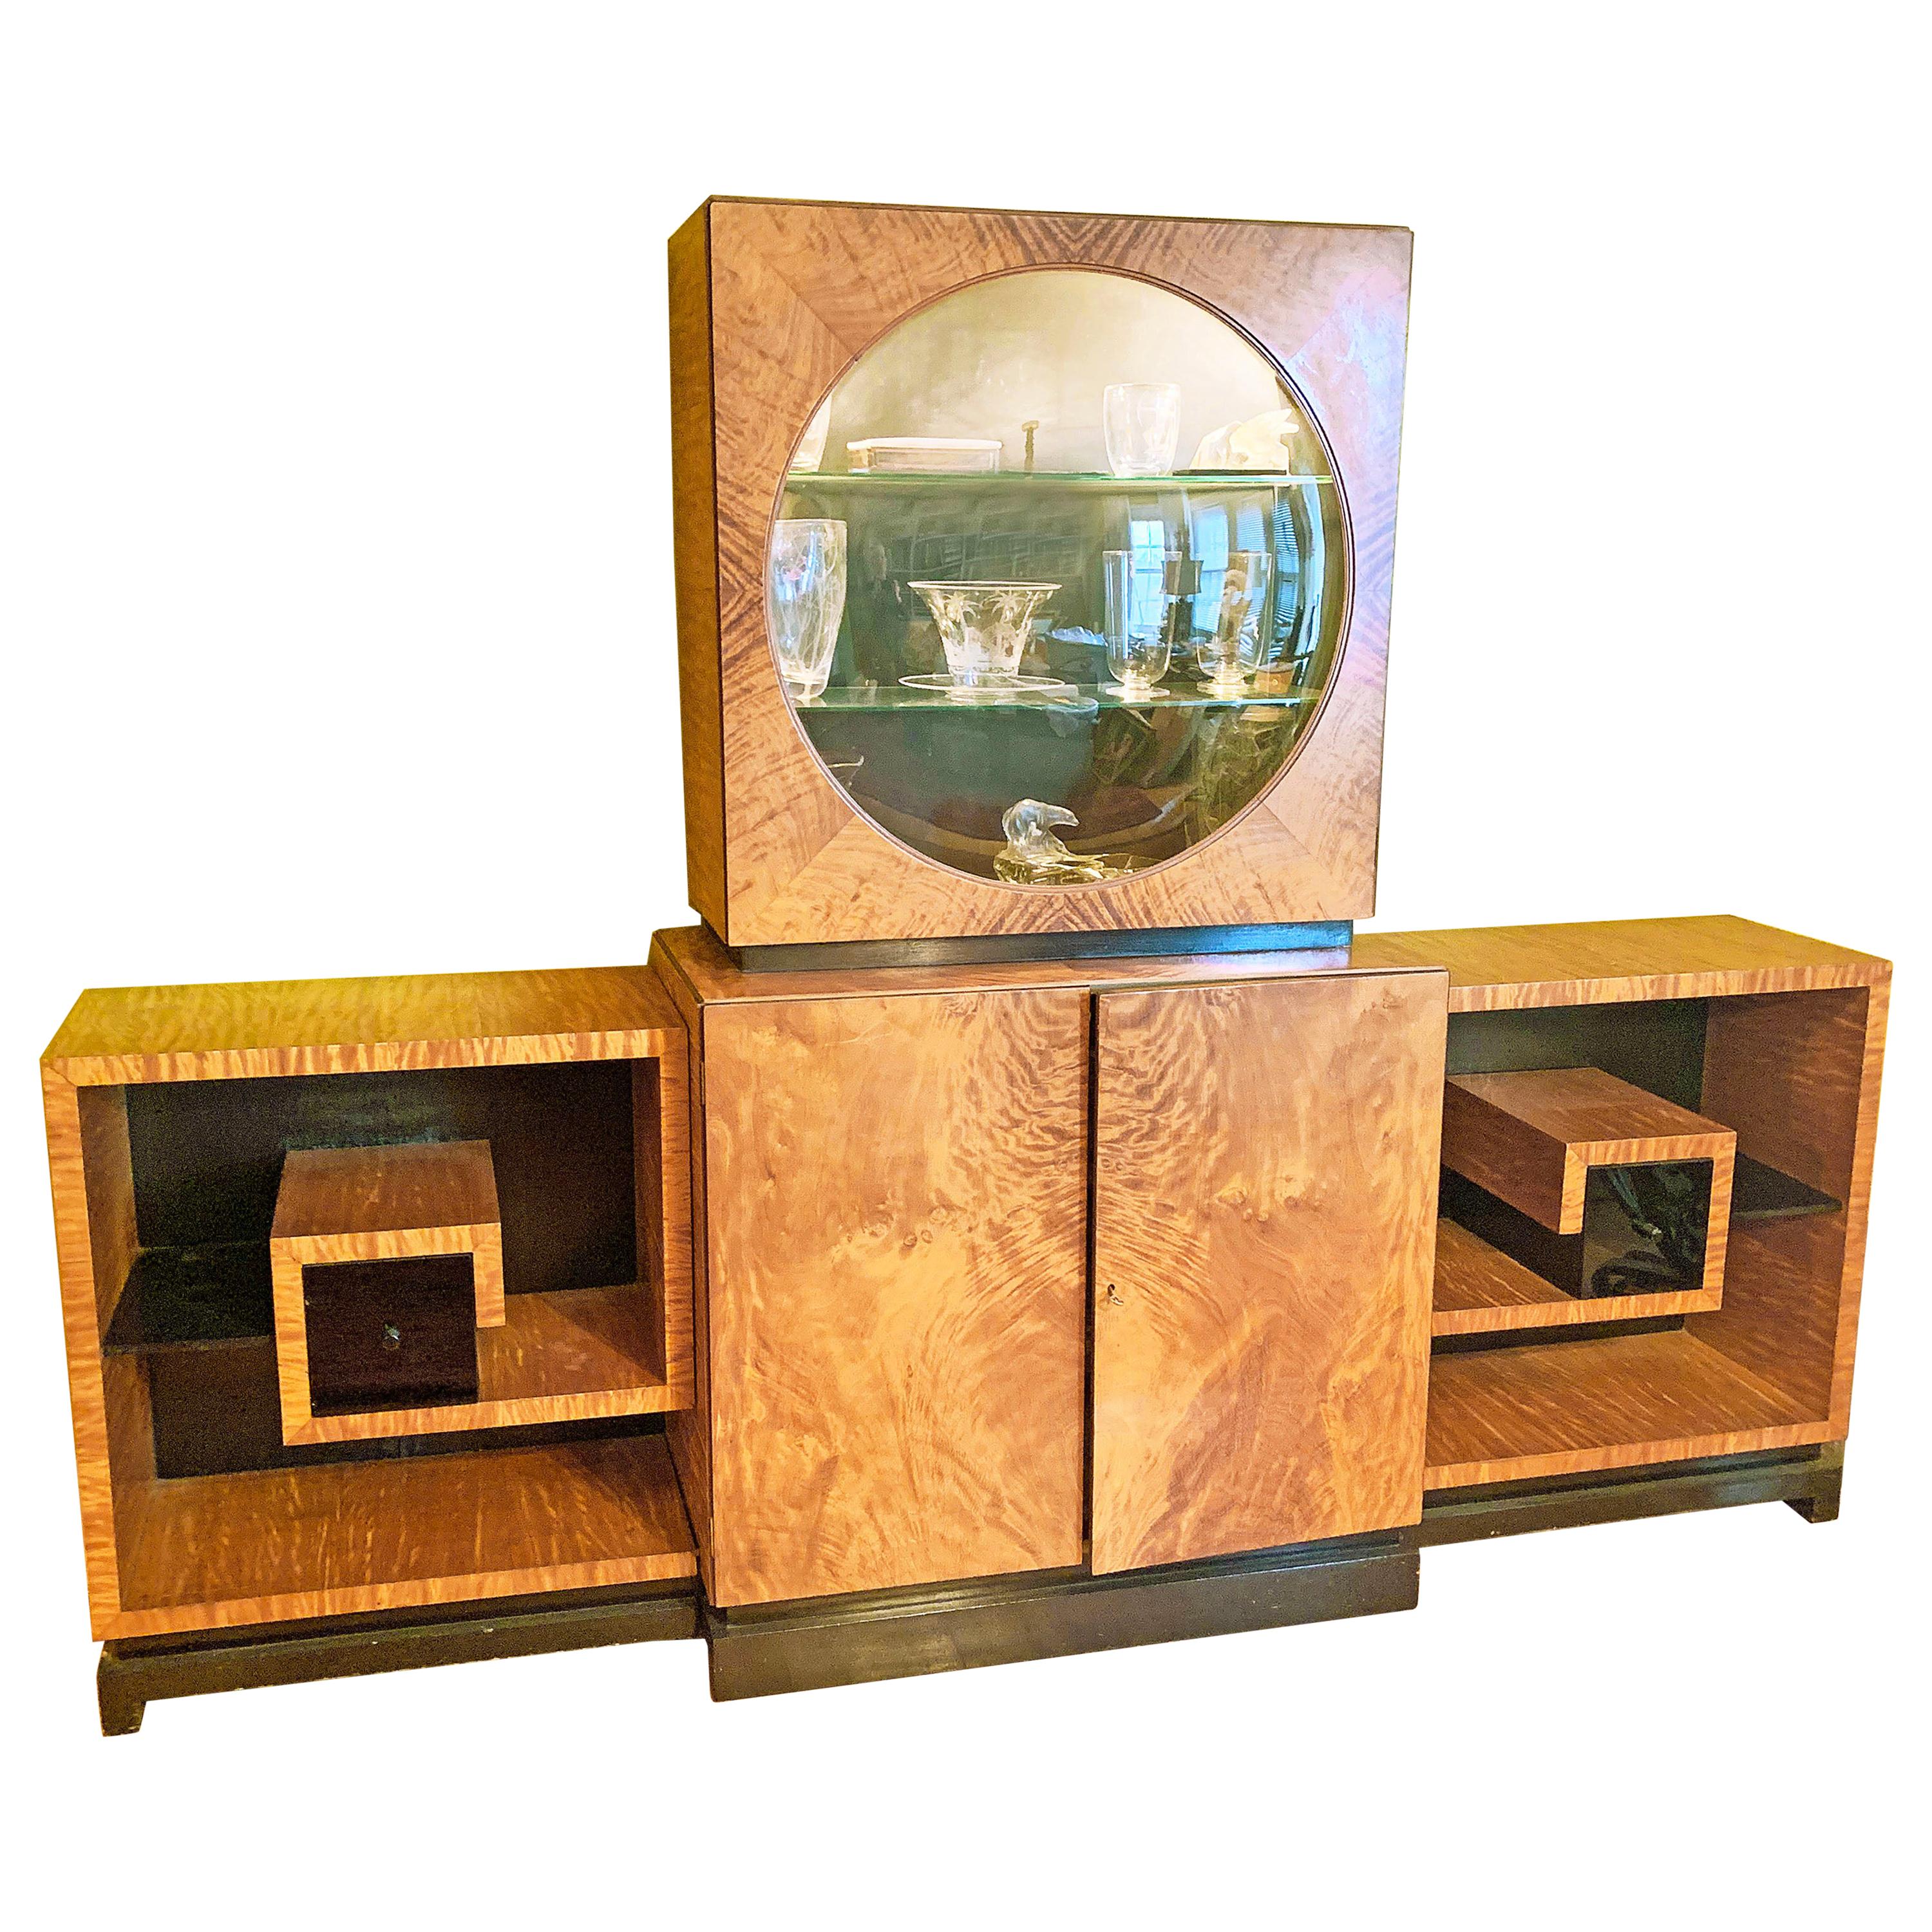 Art Deco Display Cabinet in Golden Mahogany with Vitrine and Greek Key Shelves